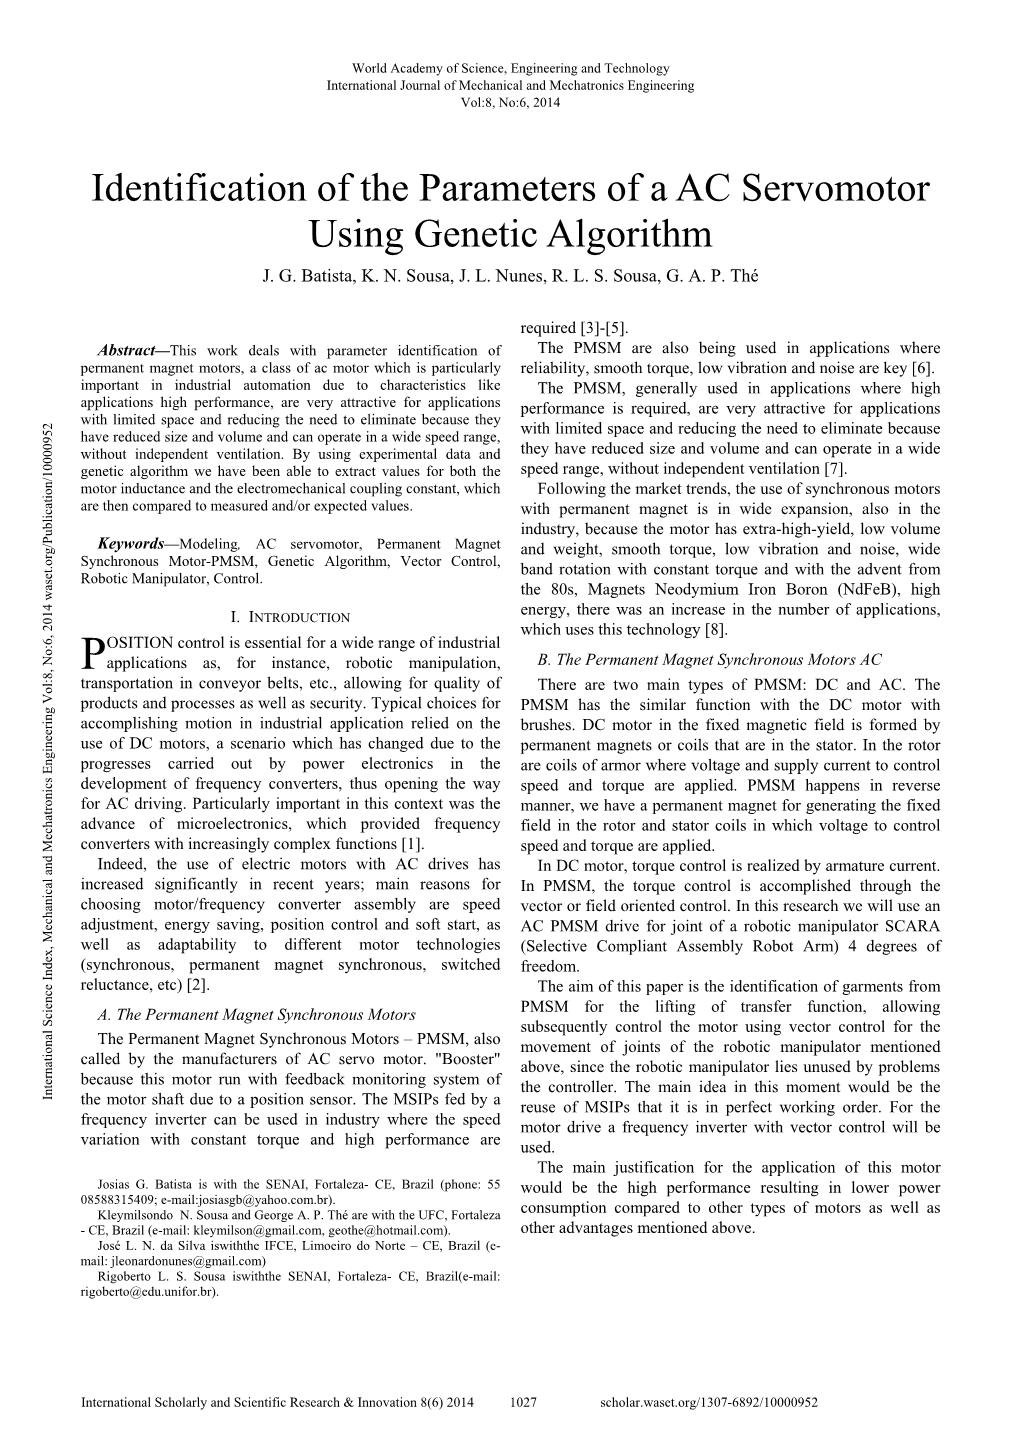 Identification of the Parameters of a AC Servomotor Using Genetic Algorithm J